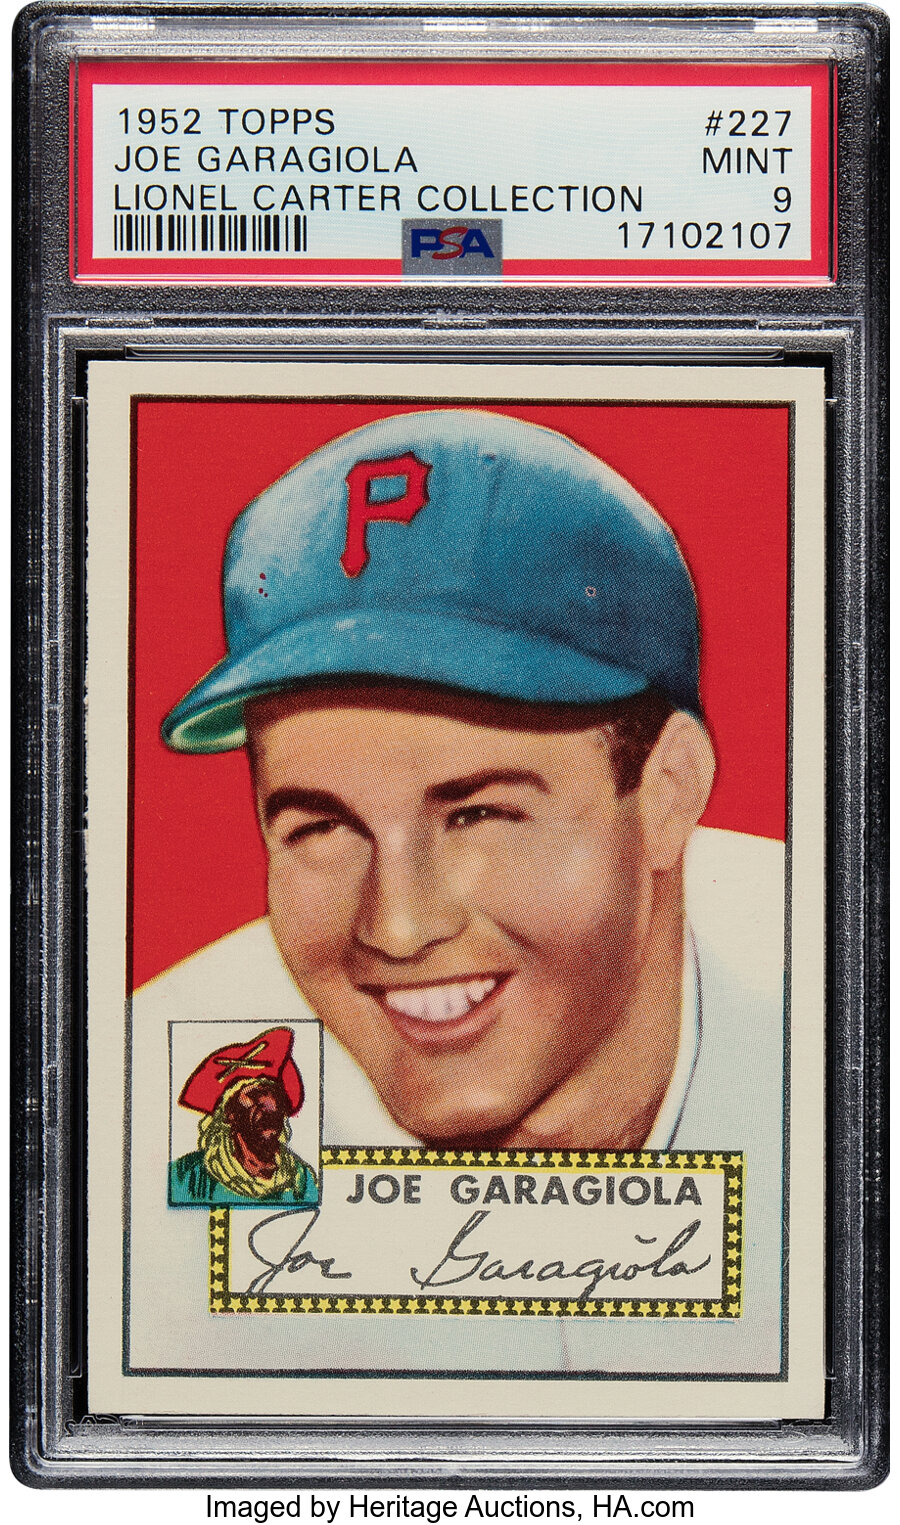 1952 Topps Joe Garagiola #227 PSA Mint 9 - None Superior! From the Lionel Carter Collection